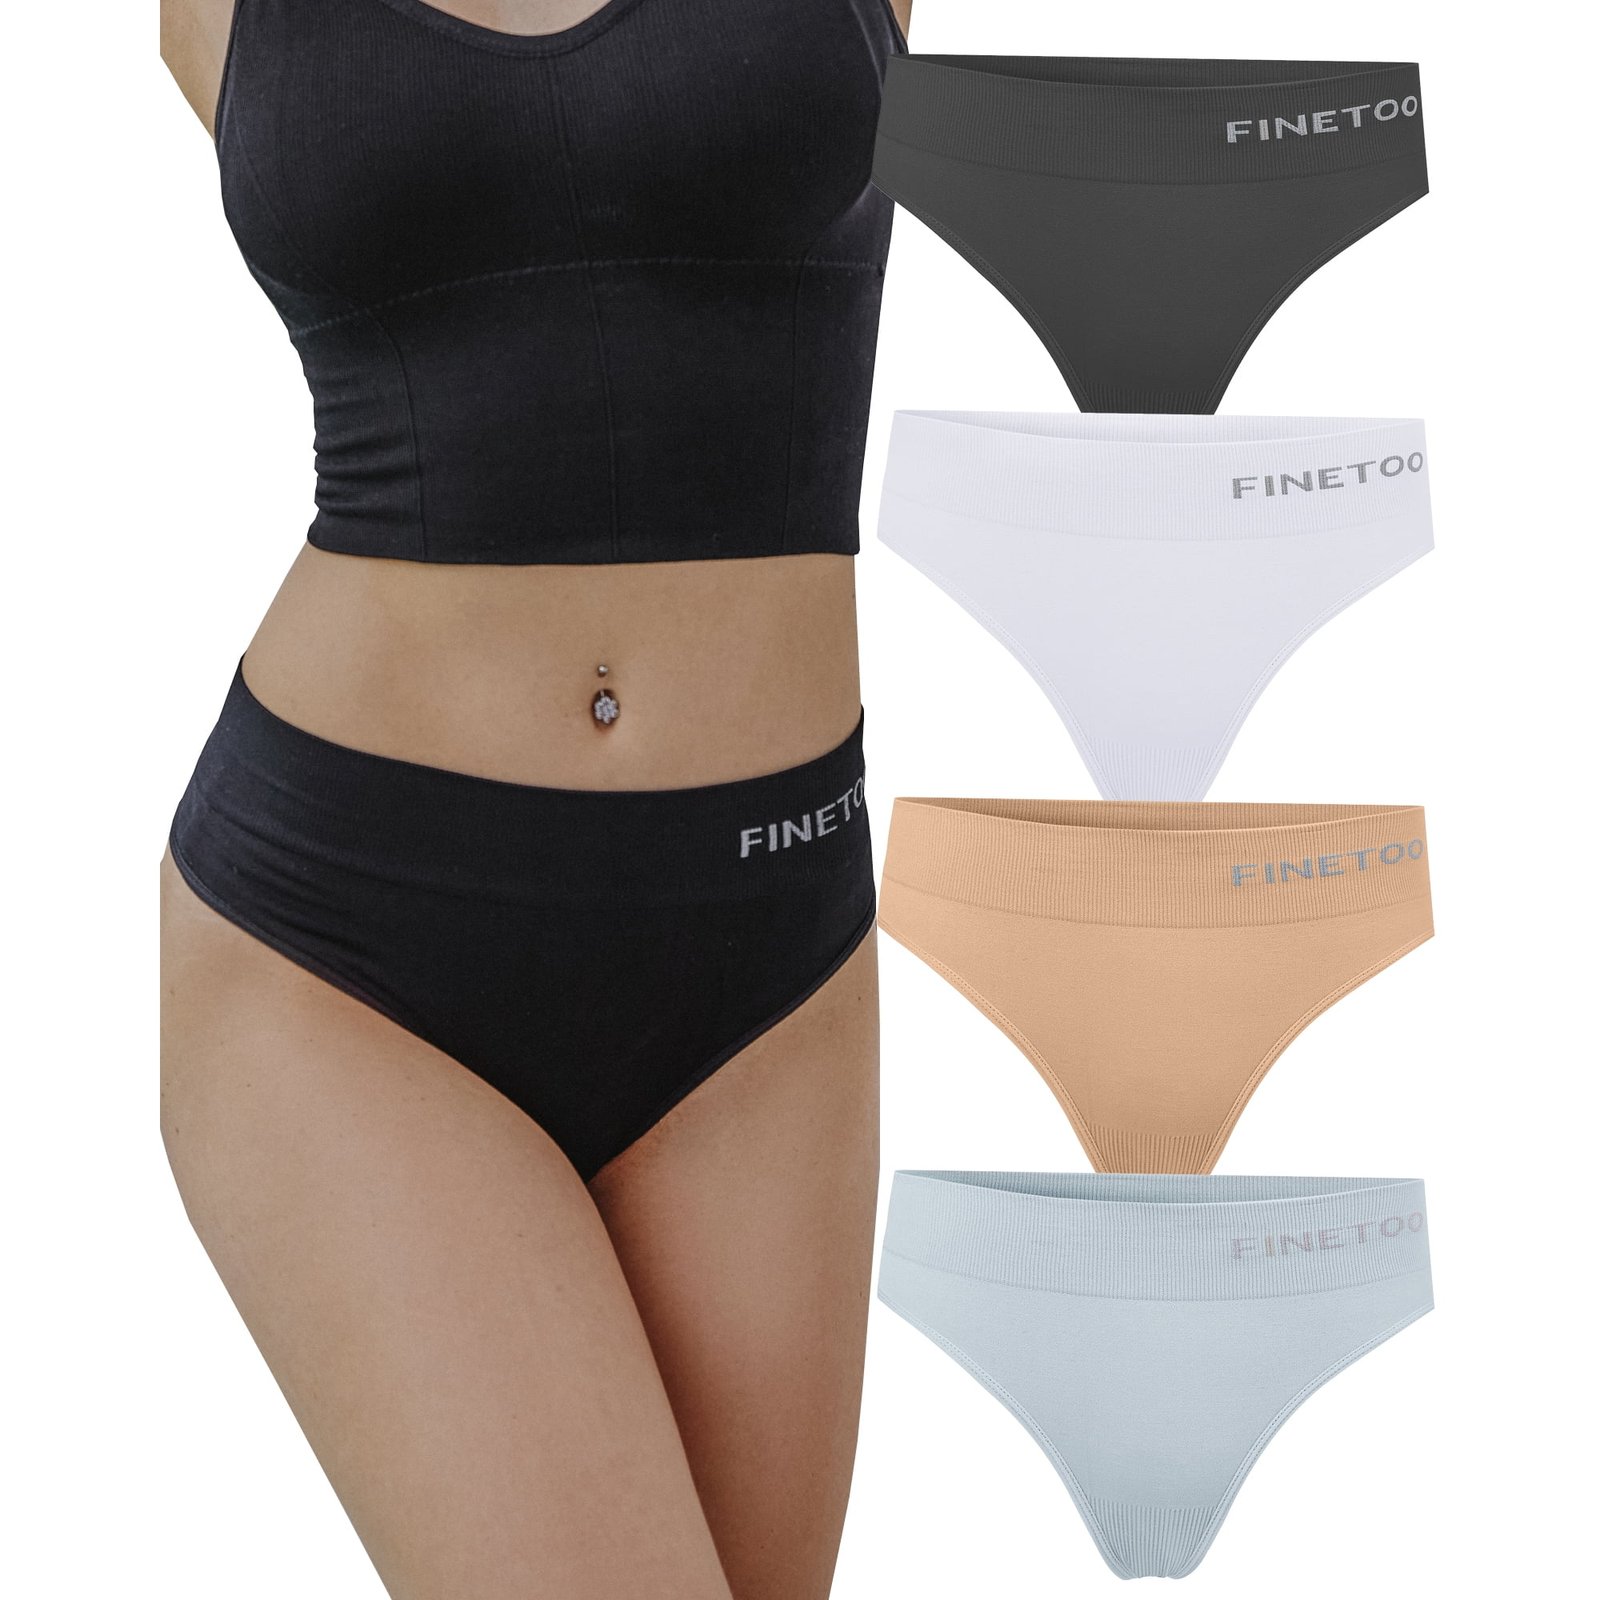 https://themarketdepot.com/wp-content/uploads/2023/12/FINETOO-High-Waisted-Thongs-for-Women-Breathable-Underwear-Soft-Stretchy-Nylon-Spandex-No-Side-Seam-Panties-S-XL-4-6-Pack_1d52c74a-b0fe-4f87-b2b0-7b31572c4b24.4eb7b5b2734457959a82a454d8ed.jpeg